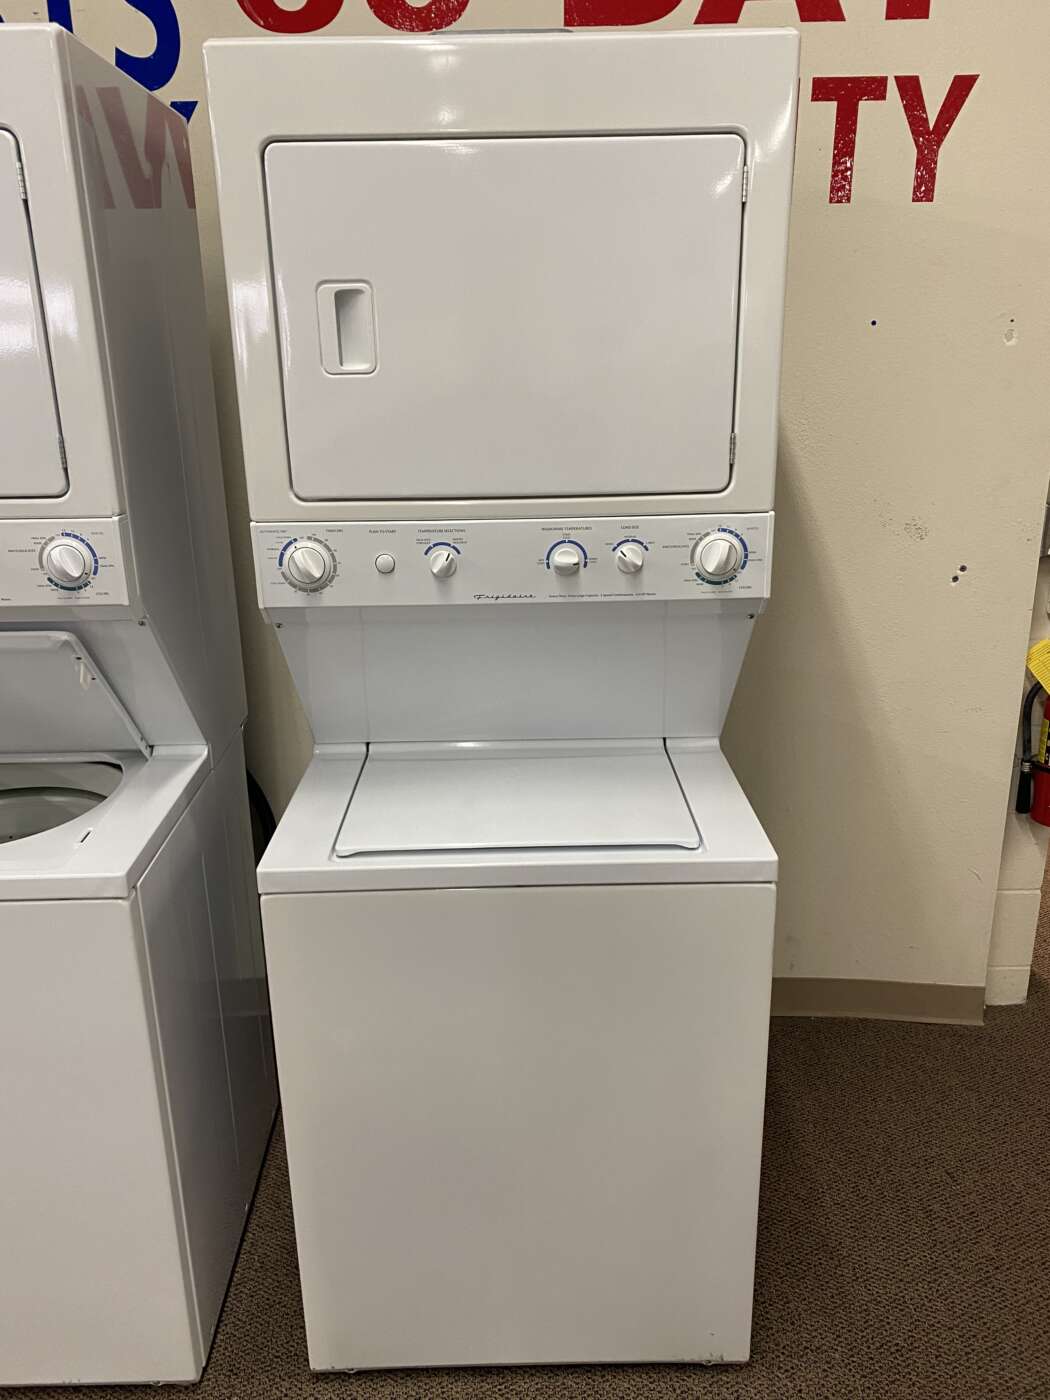 Reconditioned FRIGIDAIRE 27″ Laundry Center / 2.7 Cu. Ft. Top-Load Washer / 5.7 Cu. Ft. Electric Dryer – White